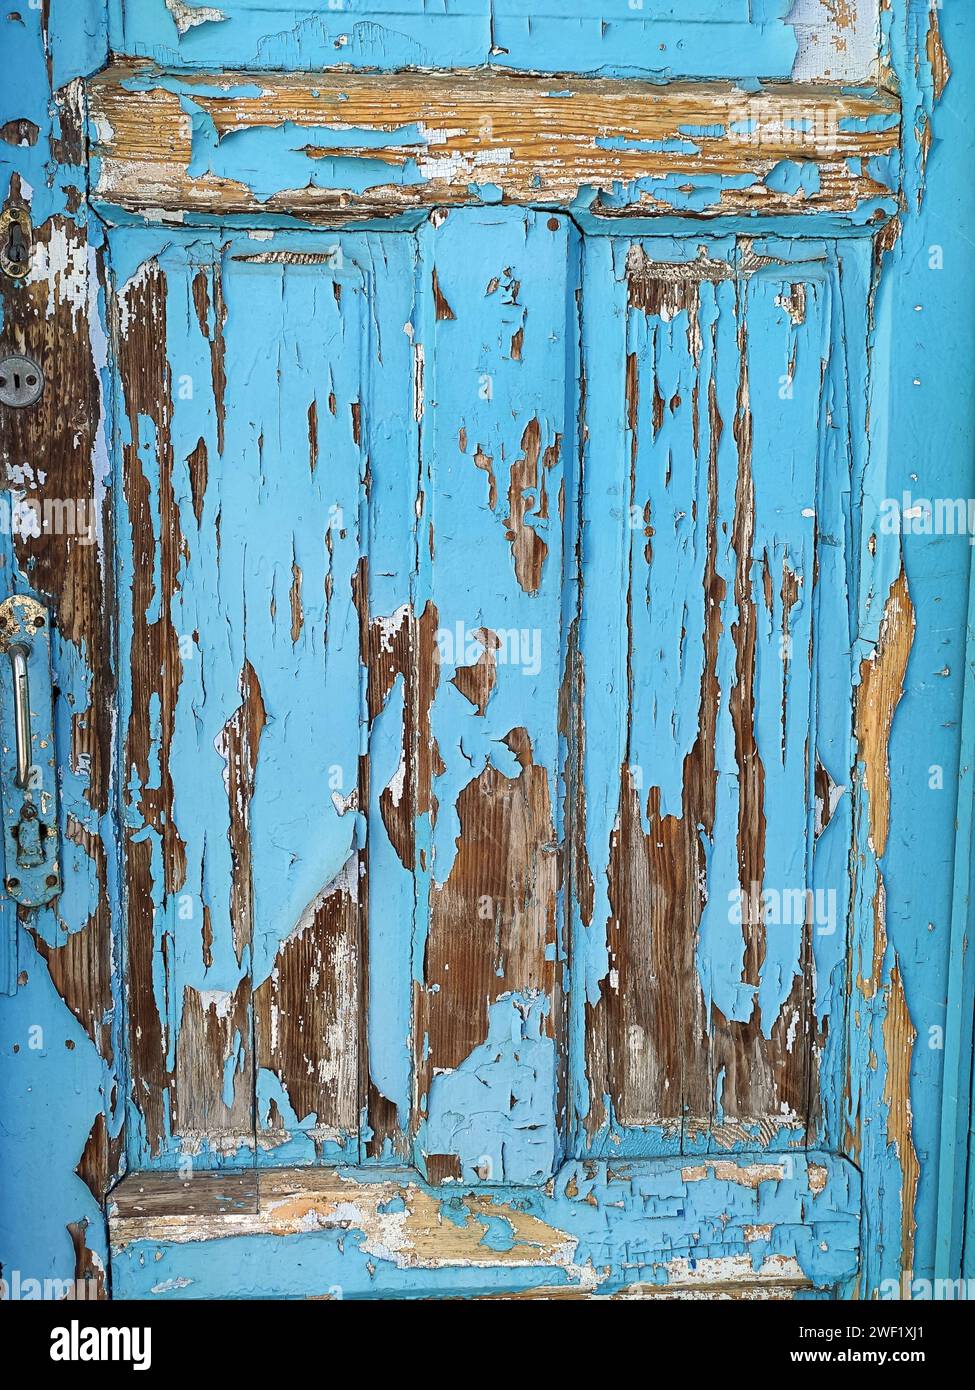 Very old wooden painted blue rustic background with cracked paint Stock Photo